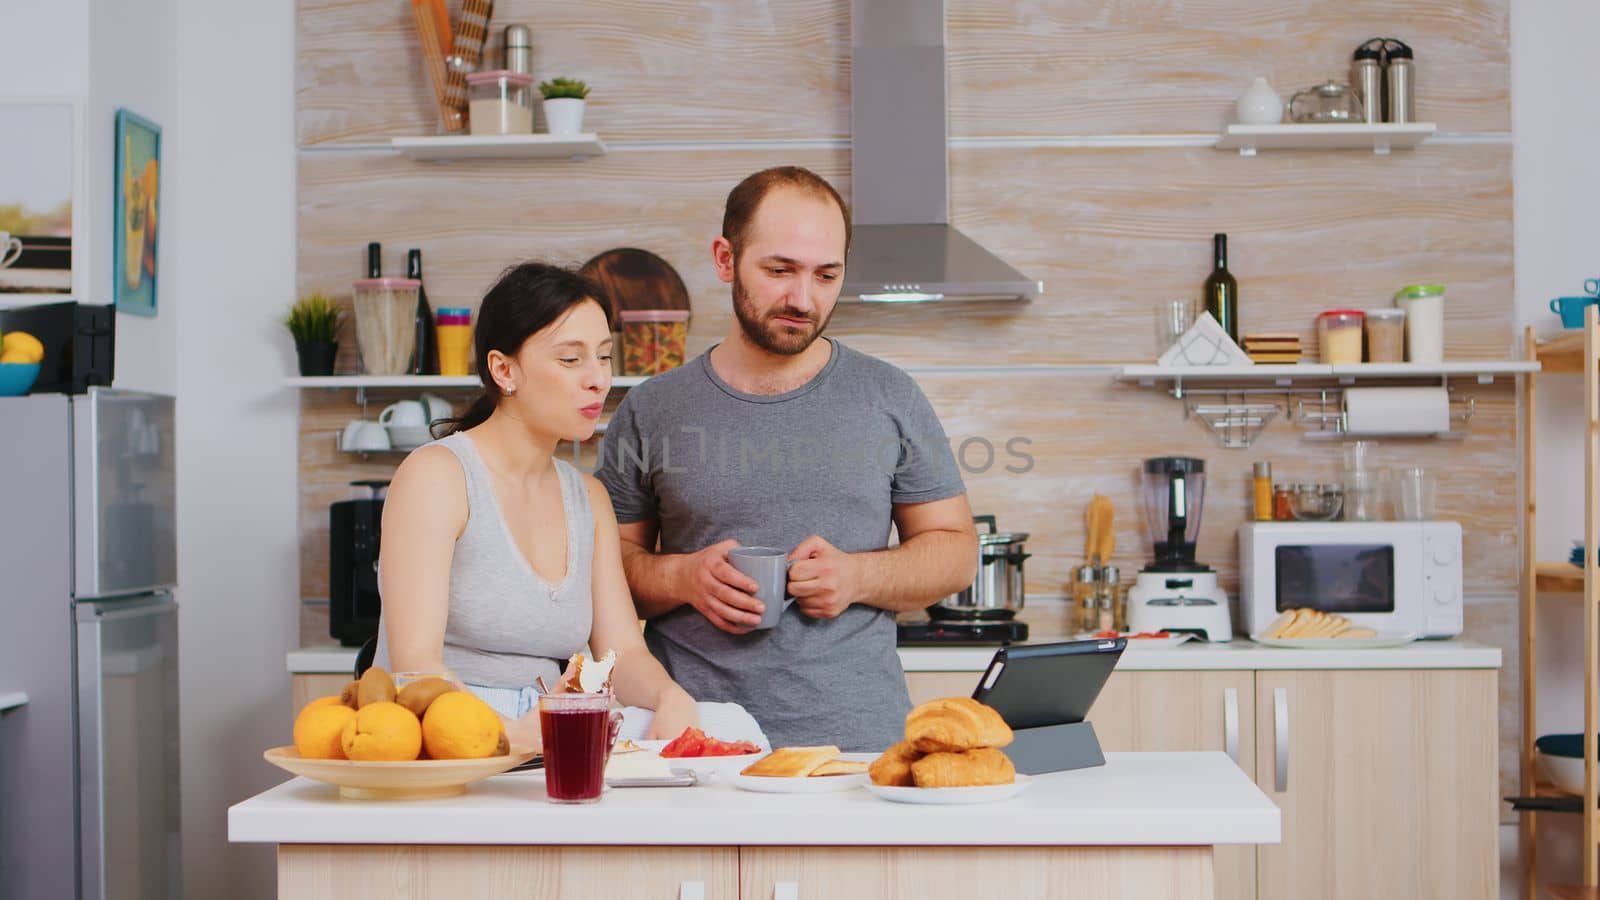 Couple waving during video call while eating delicious breakfast in kitchen. Videoconference in the morning, using online web internet technology, talking and communicating with relatives